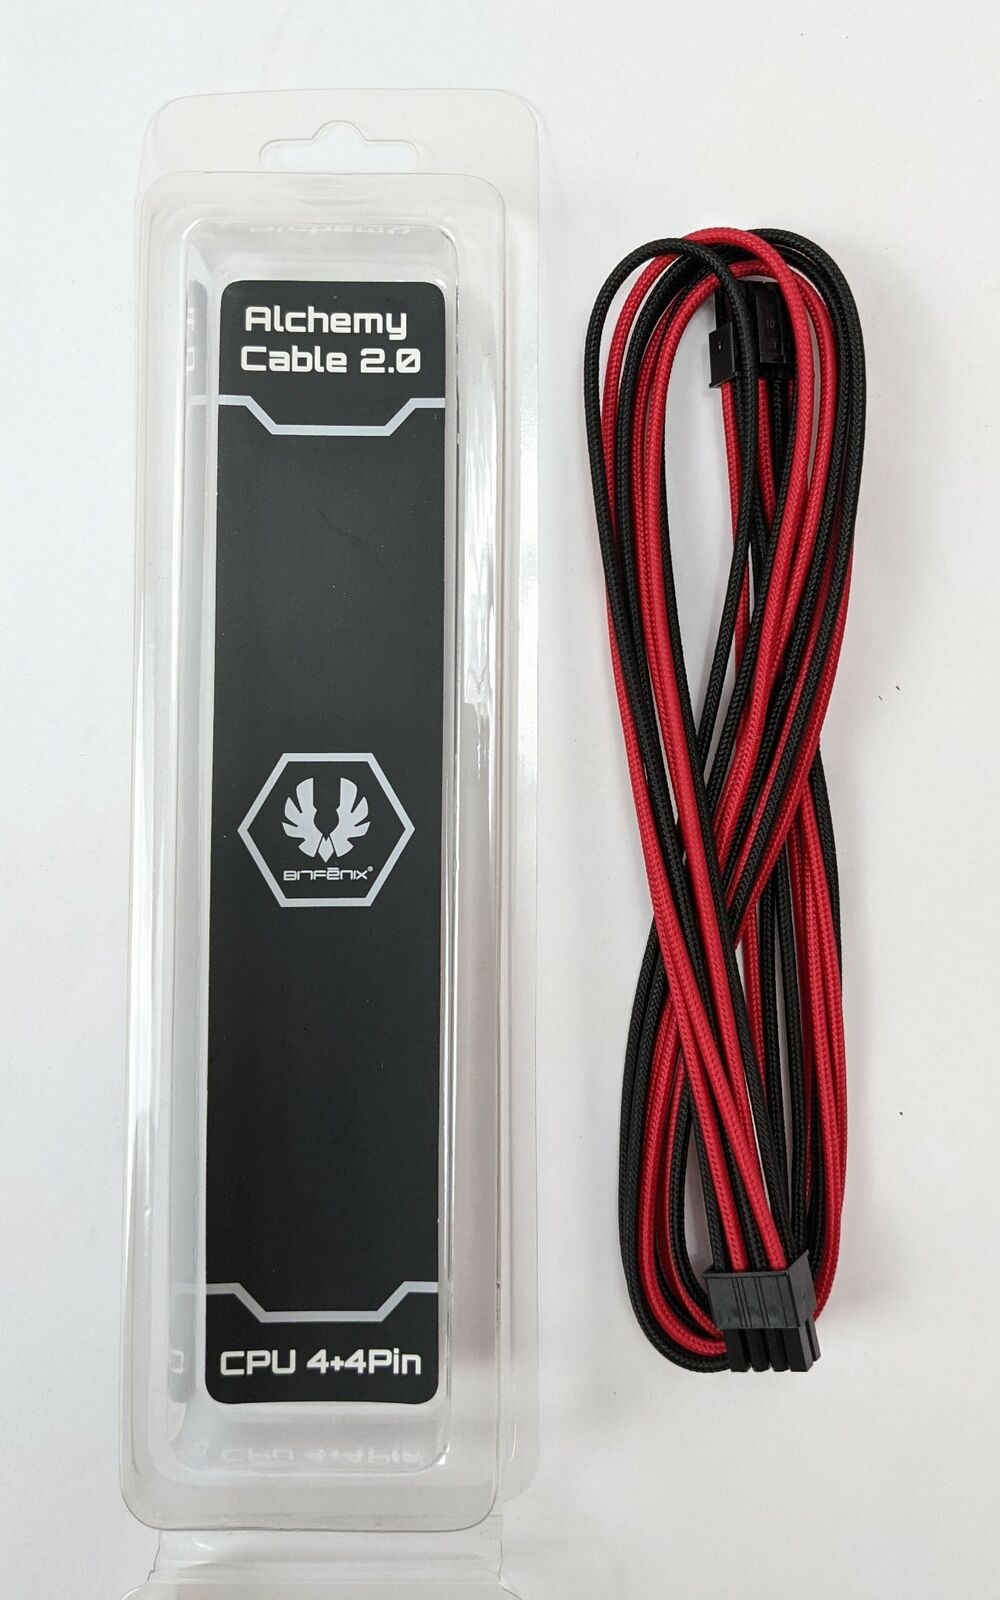 Bitfenix Alchemy Extension Cable 2.0 CPU 4+4 Pin Sleeved Red/Black